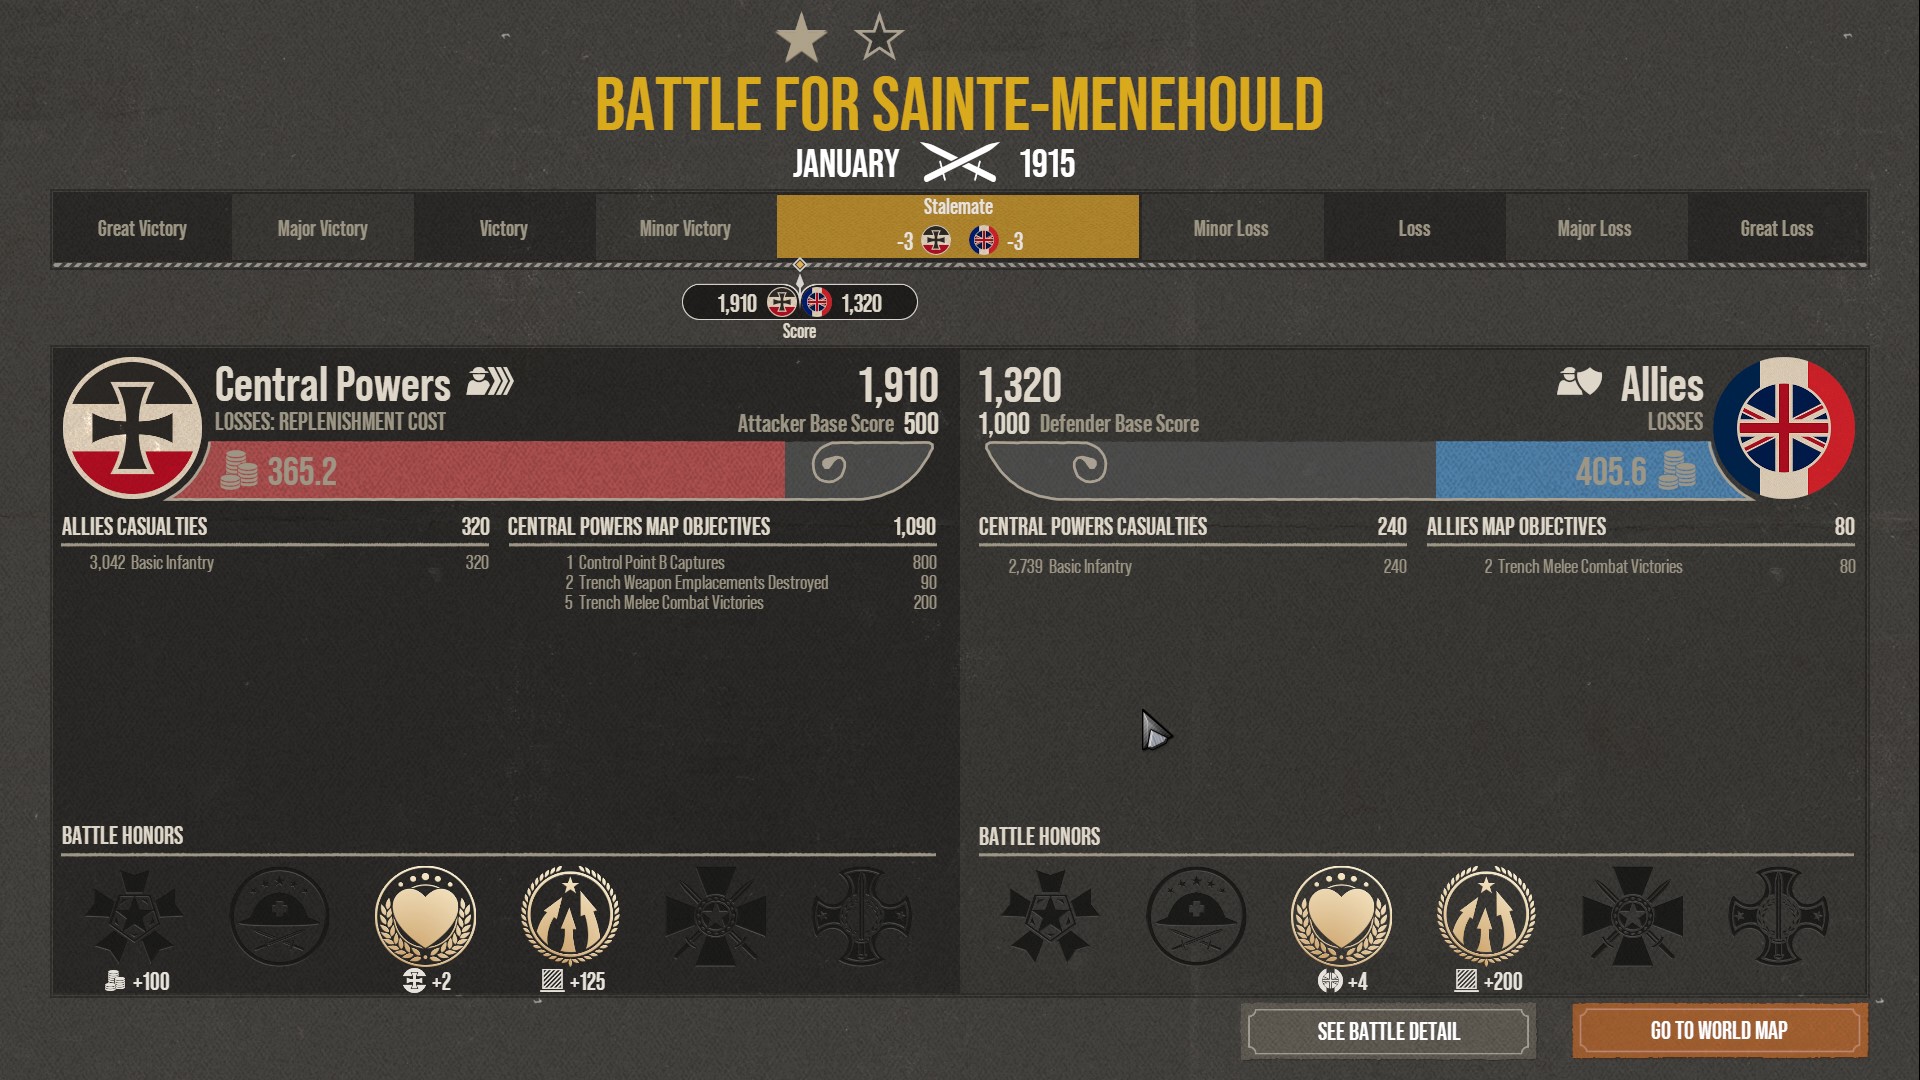 A battle results screen in The Great War